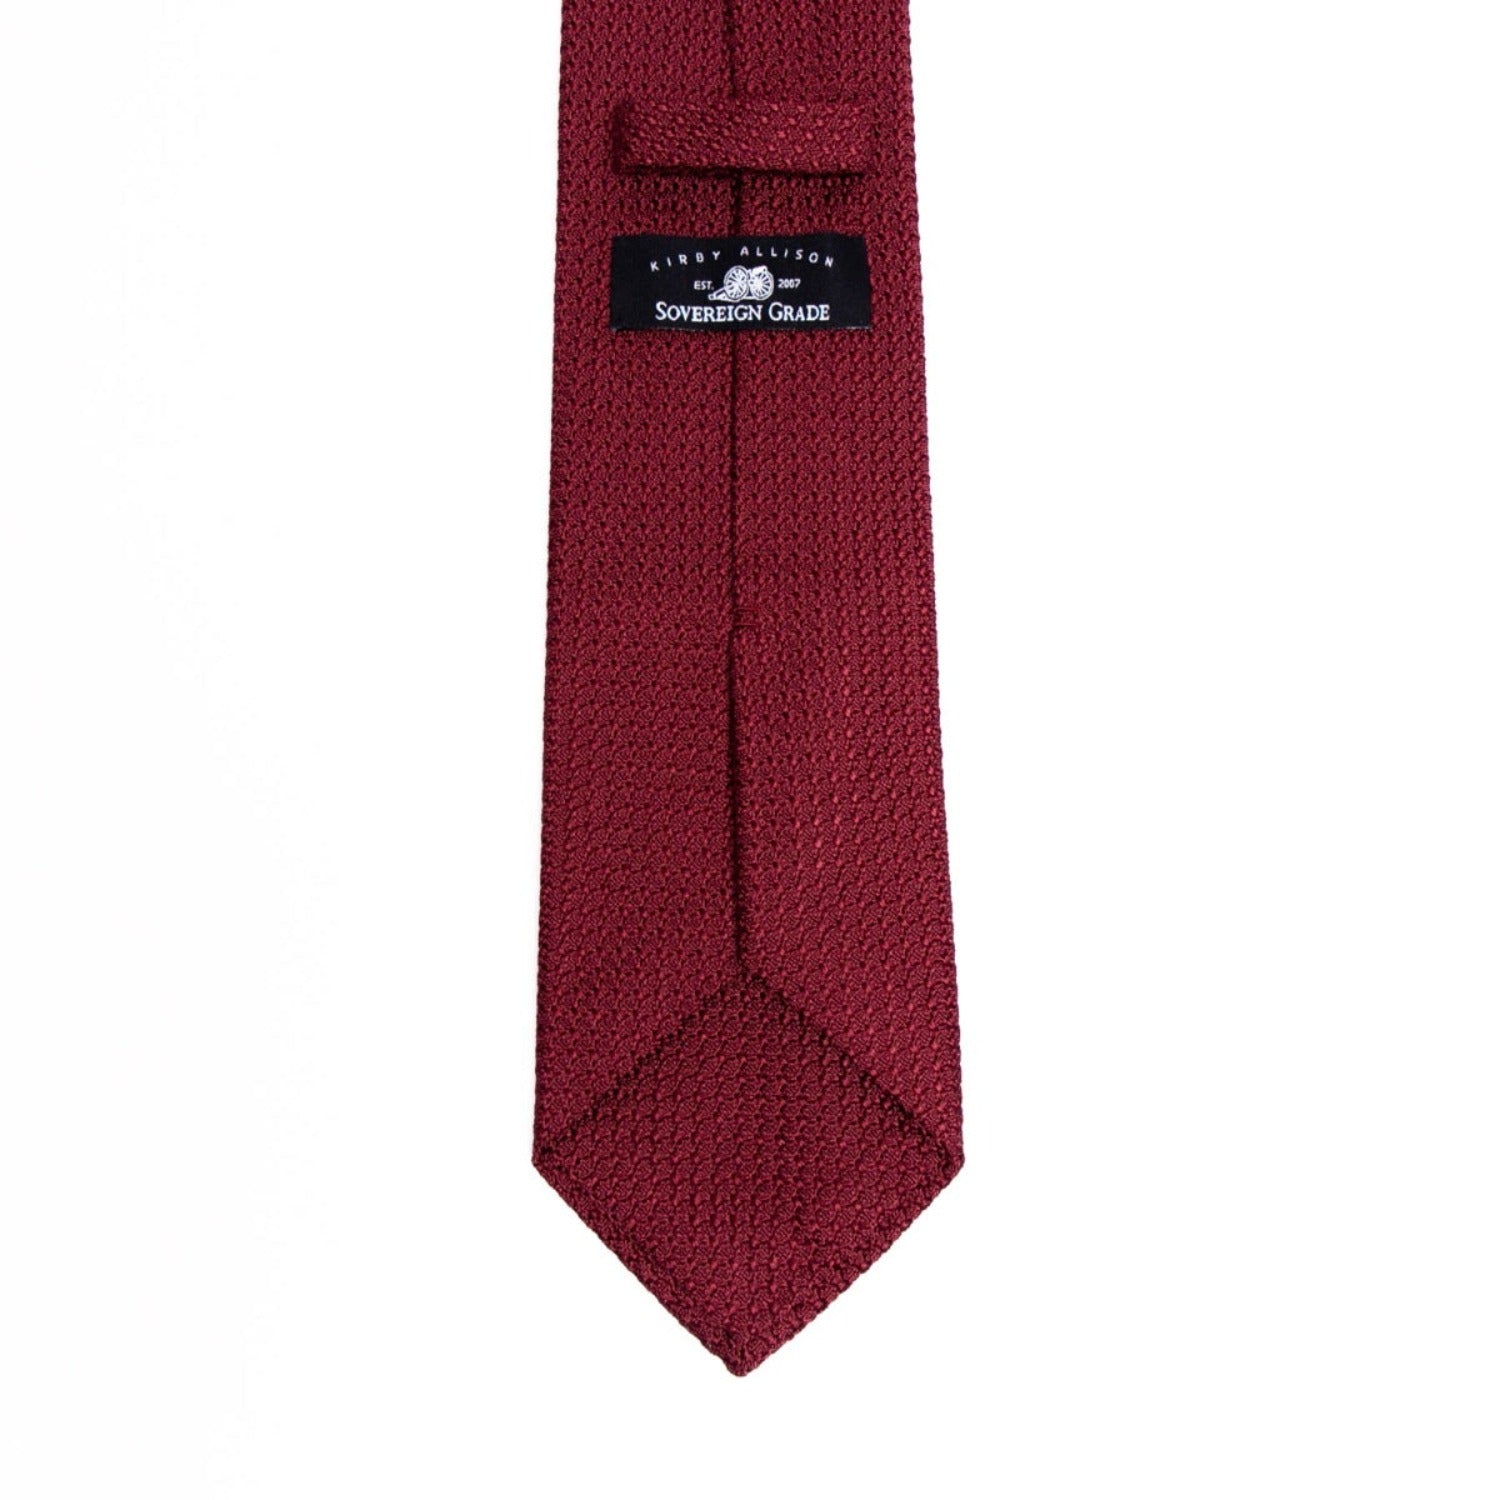 A high-quality Sovereign Grade Grenadine Grossa Ruby Tie from KirbyAllison.com on a white background.